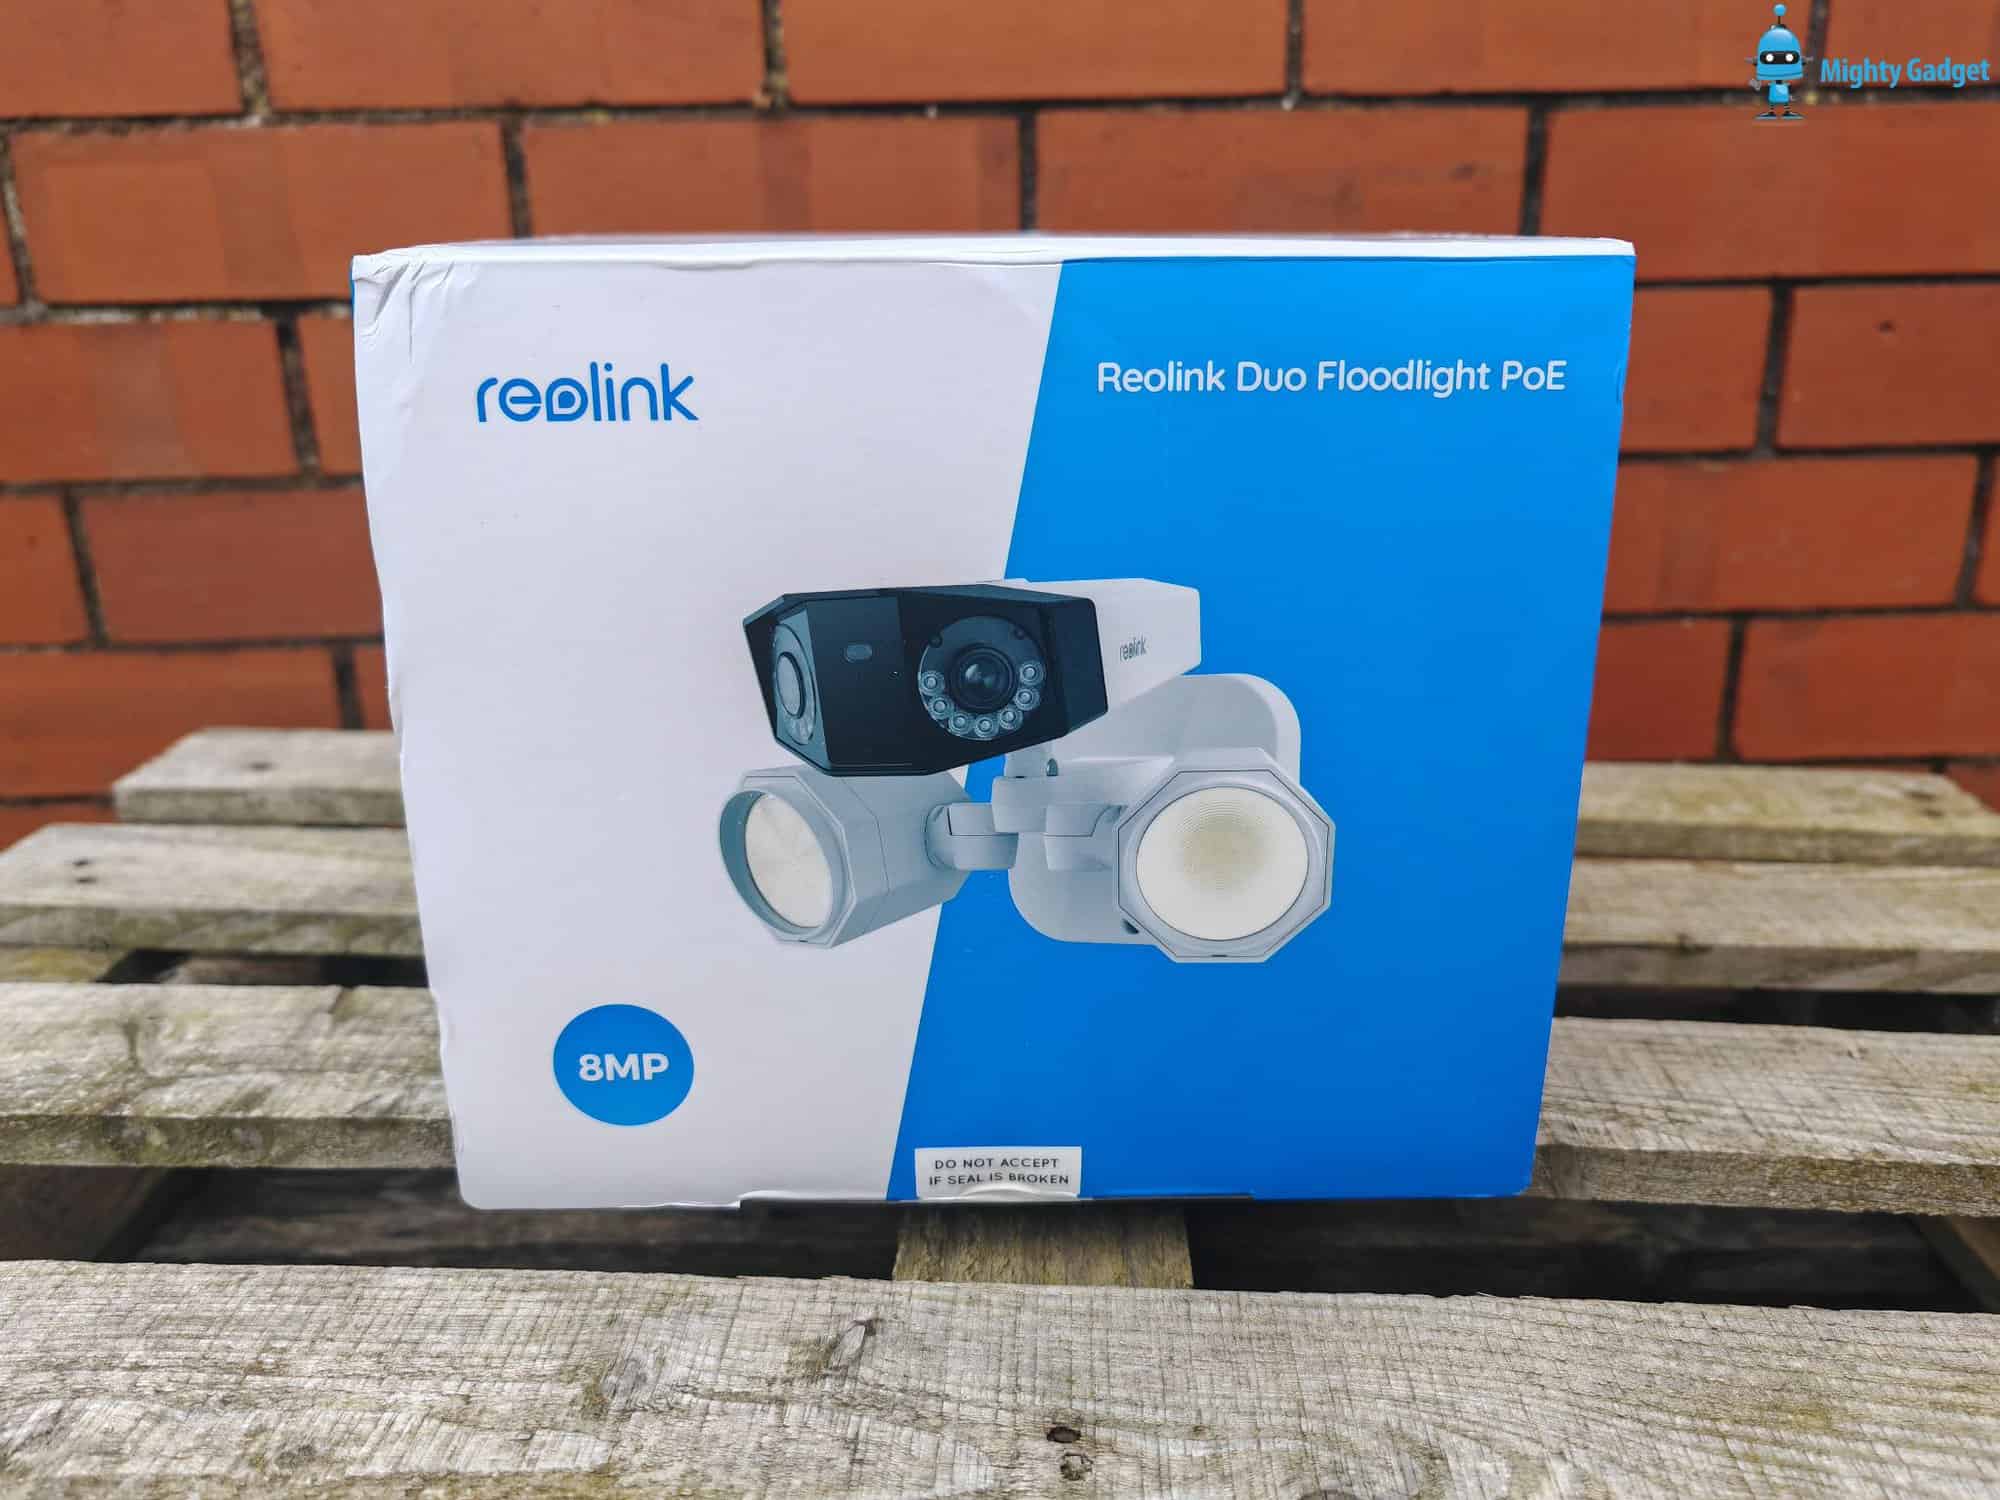 Reolink Duo Floodlight PoE Surveillance Camera Review by Mighty Gadget